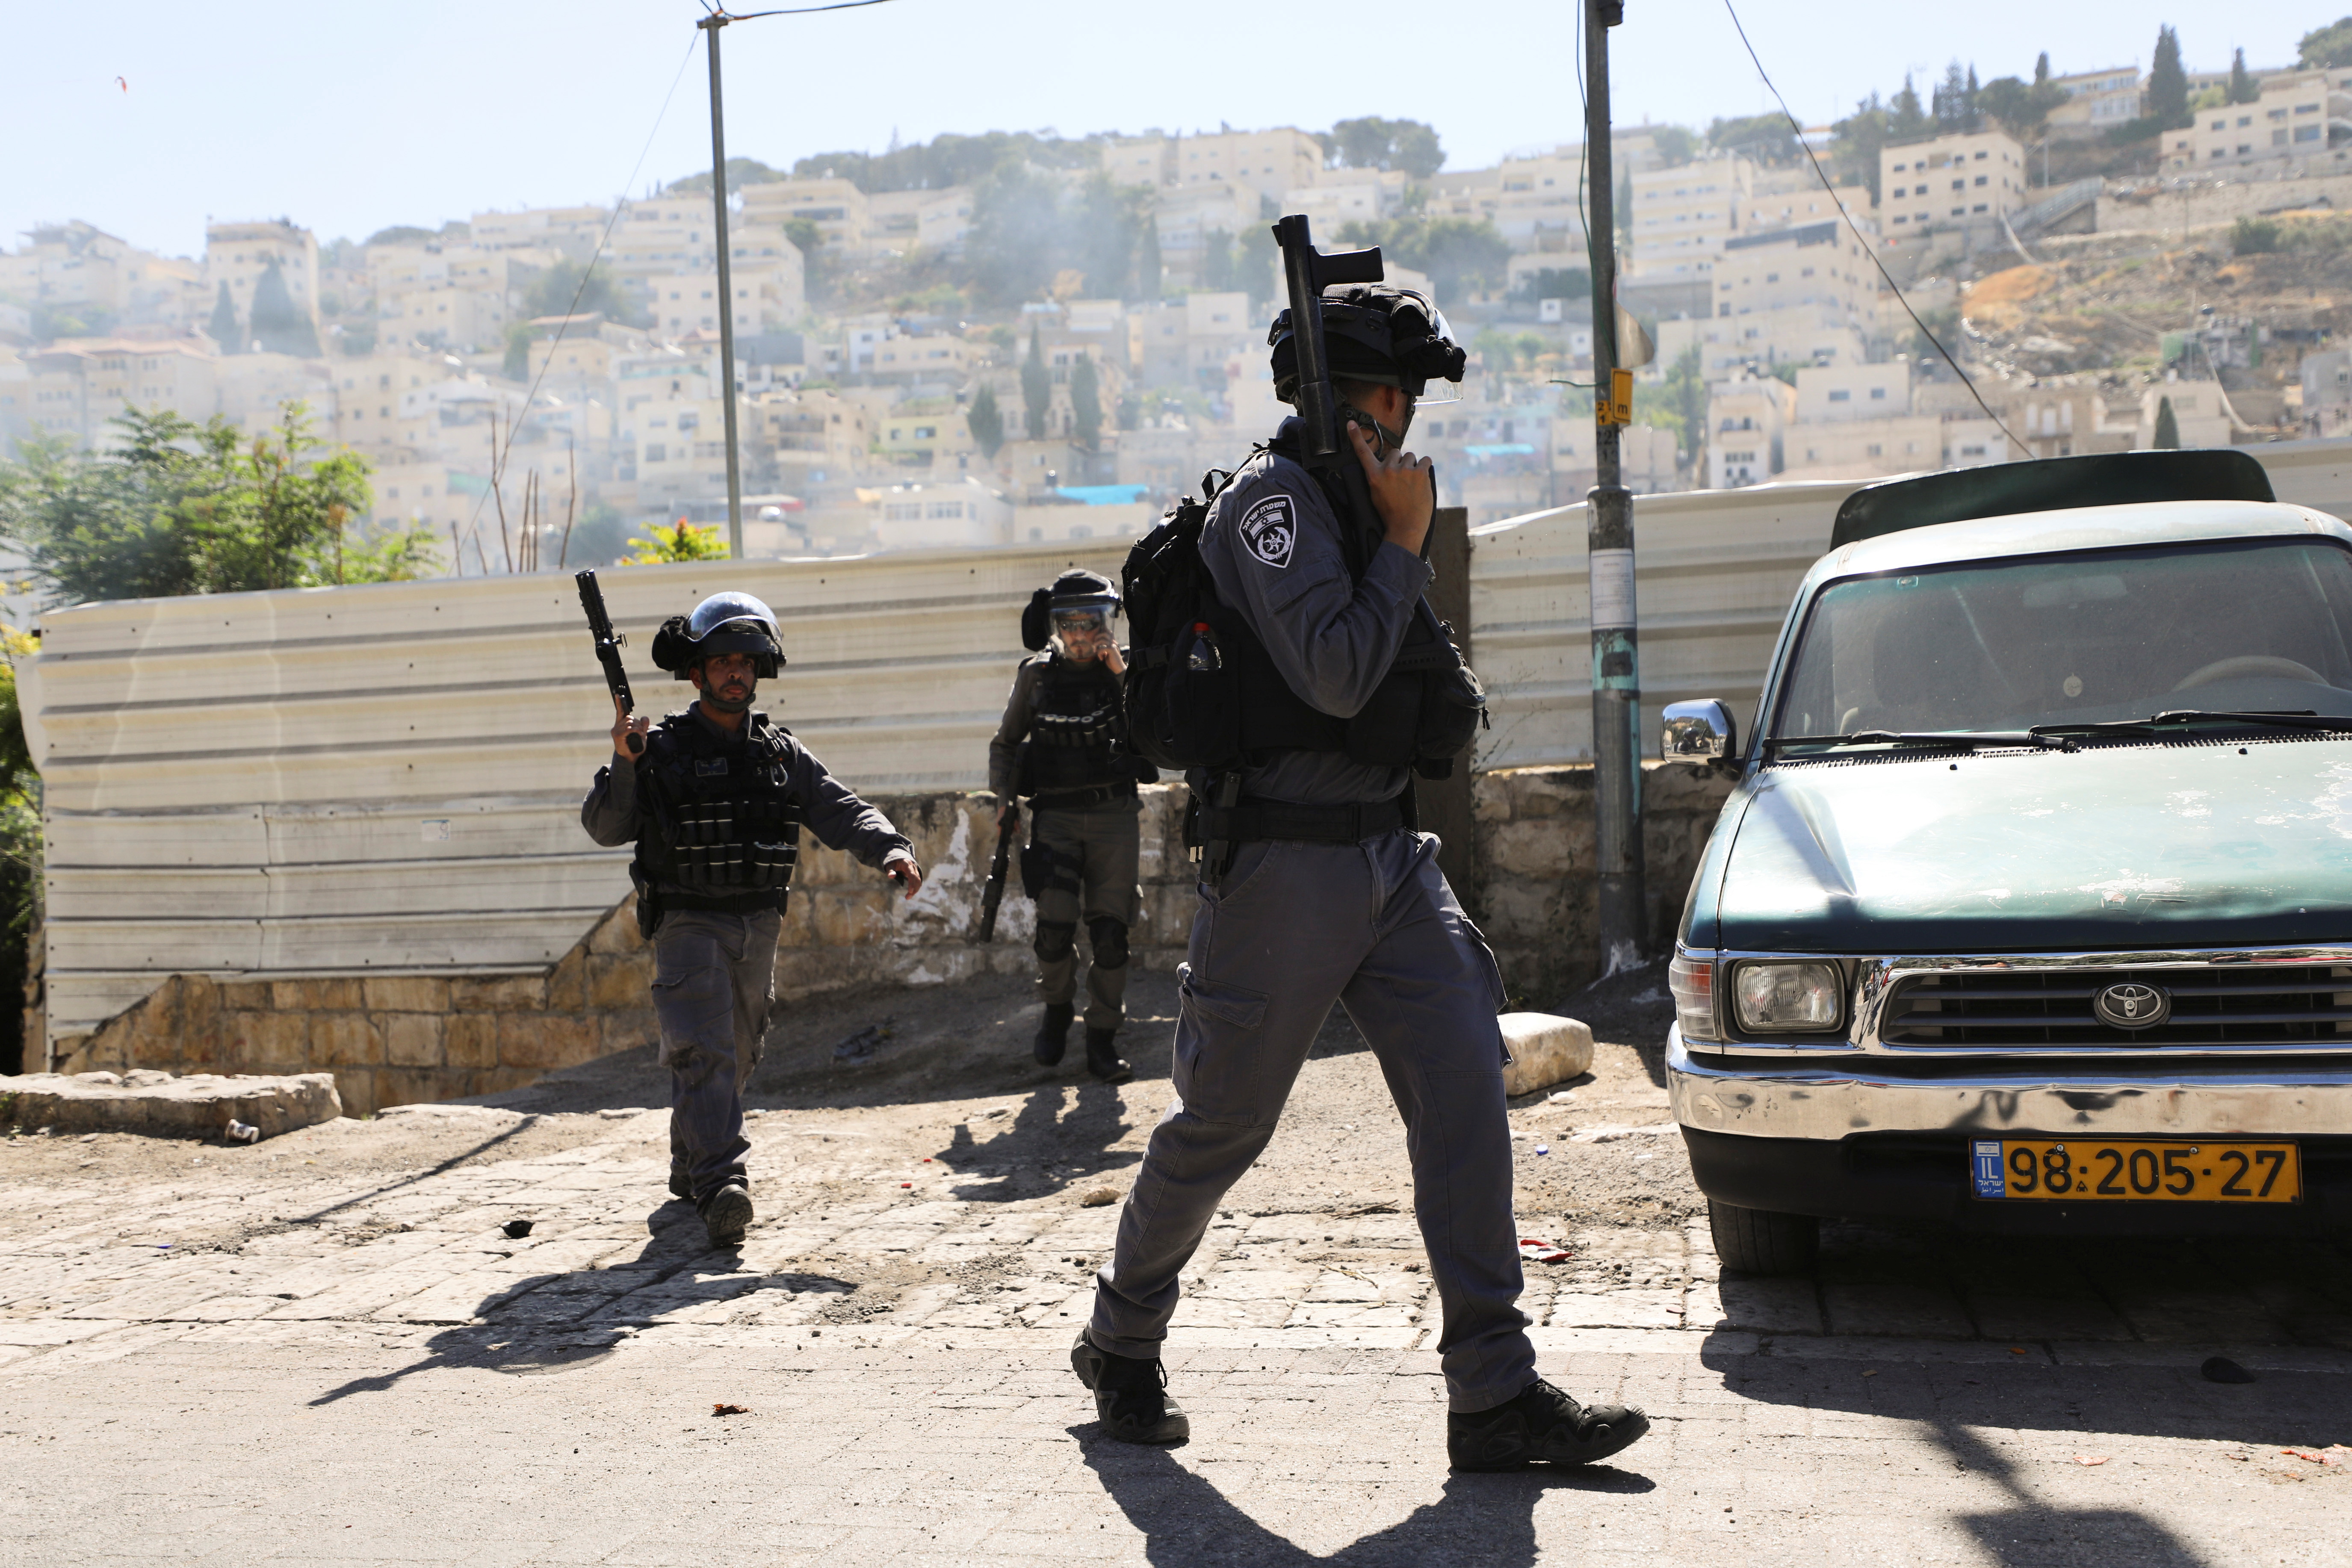 Israeli security force members hold their weapons during clashes with Palestinians which erupted over Israel's demolition of a shop in the Palestinian neighbourhood of Silwan in East Jerusalem